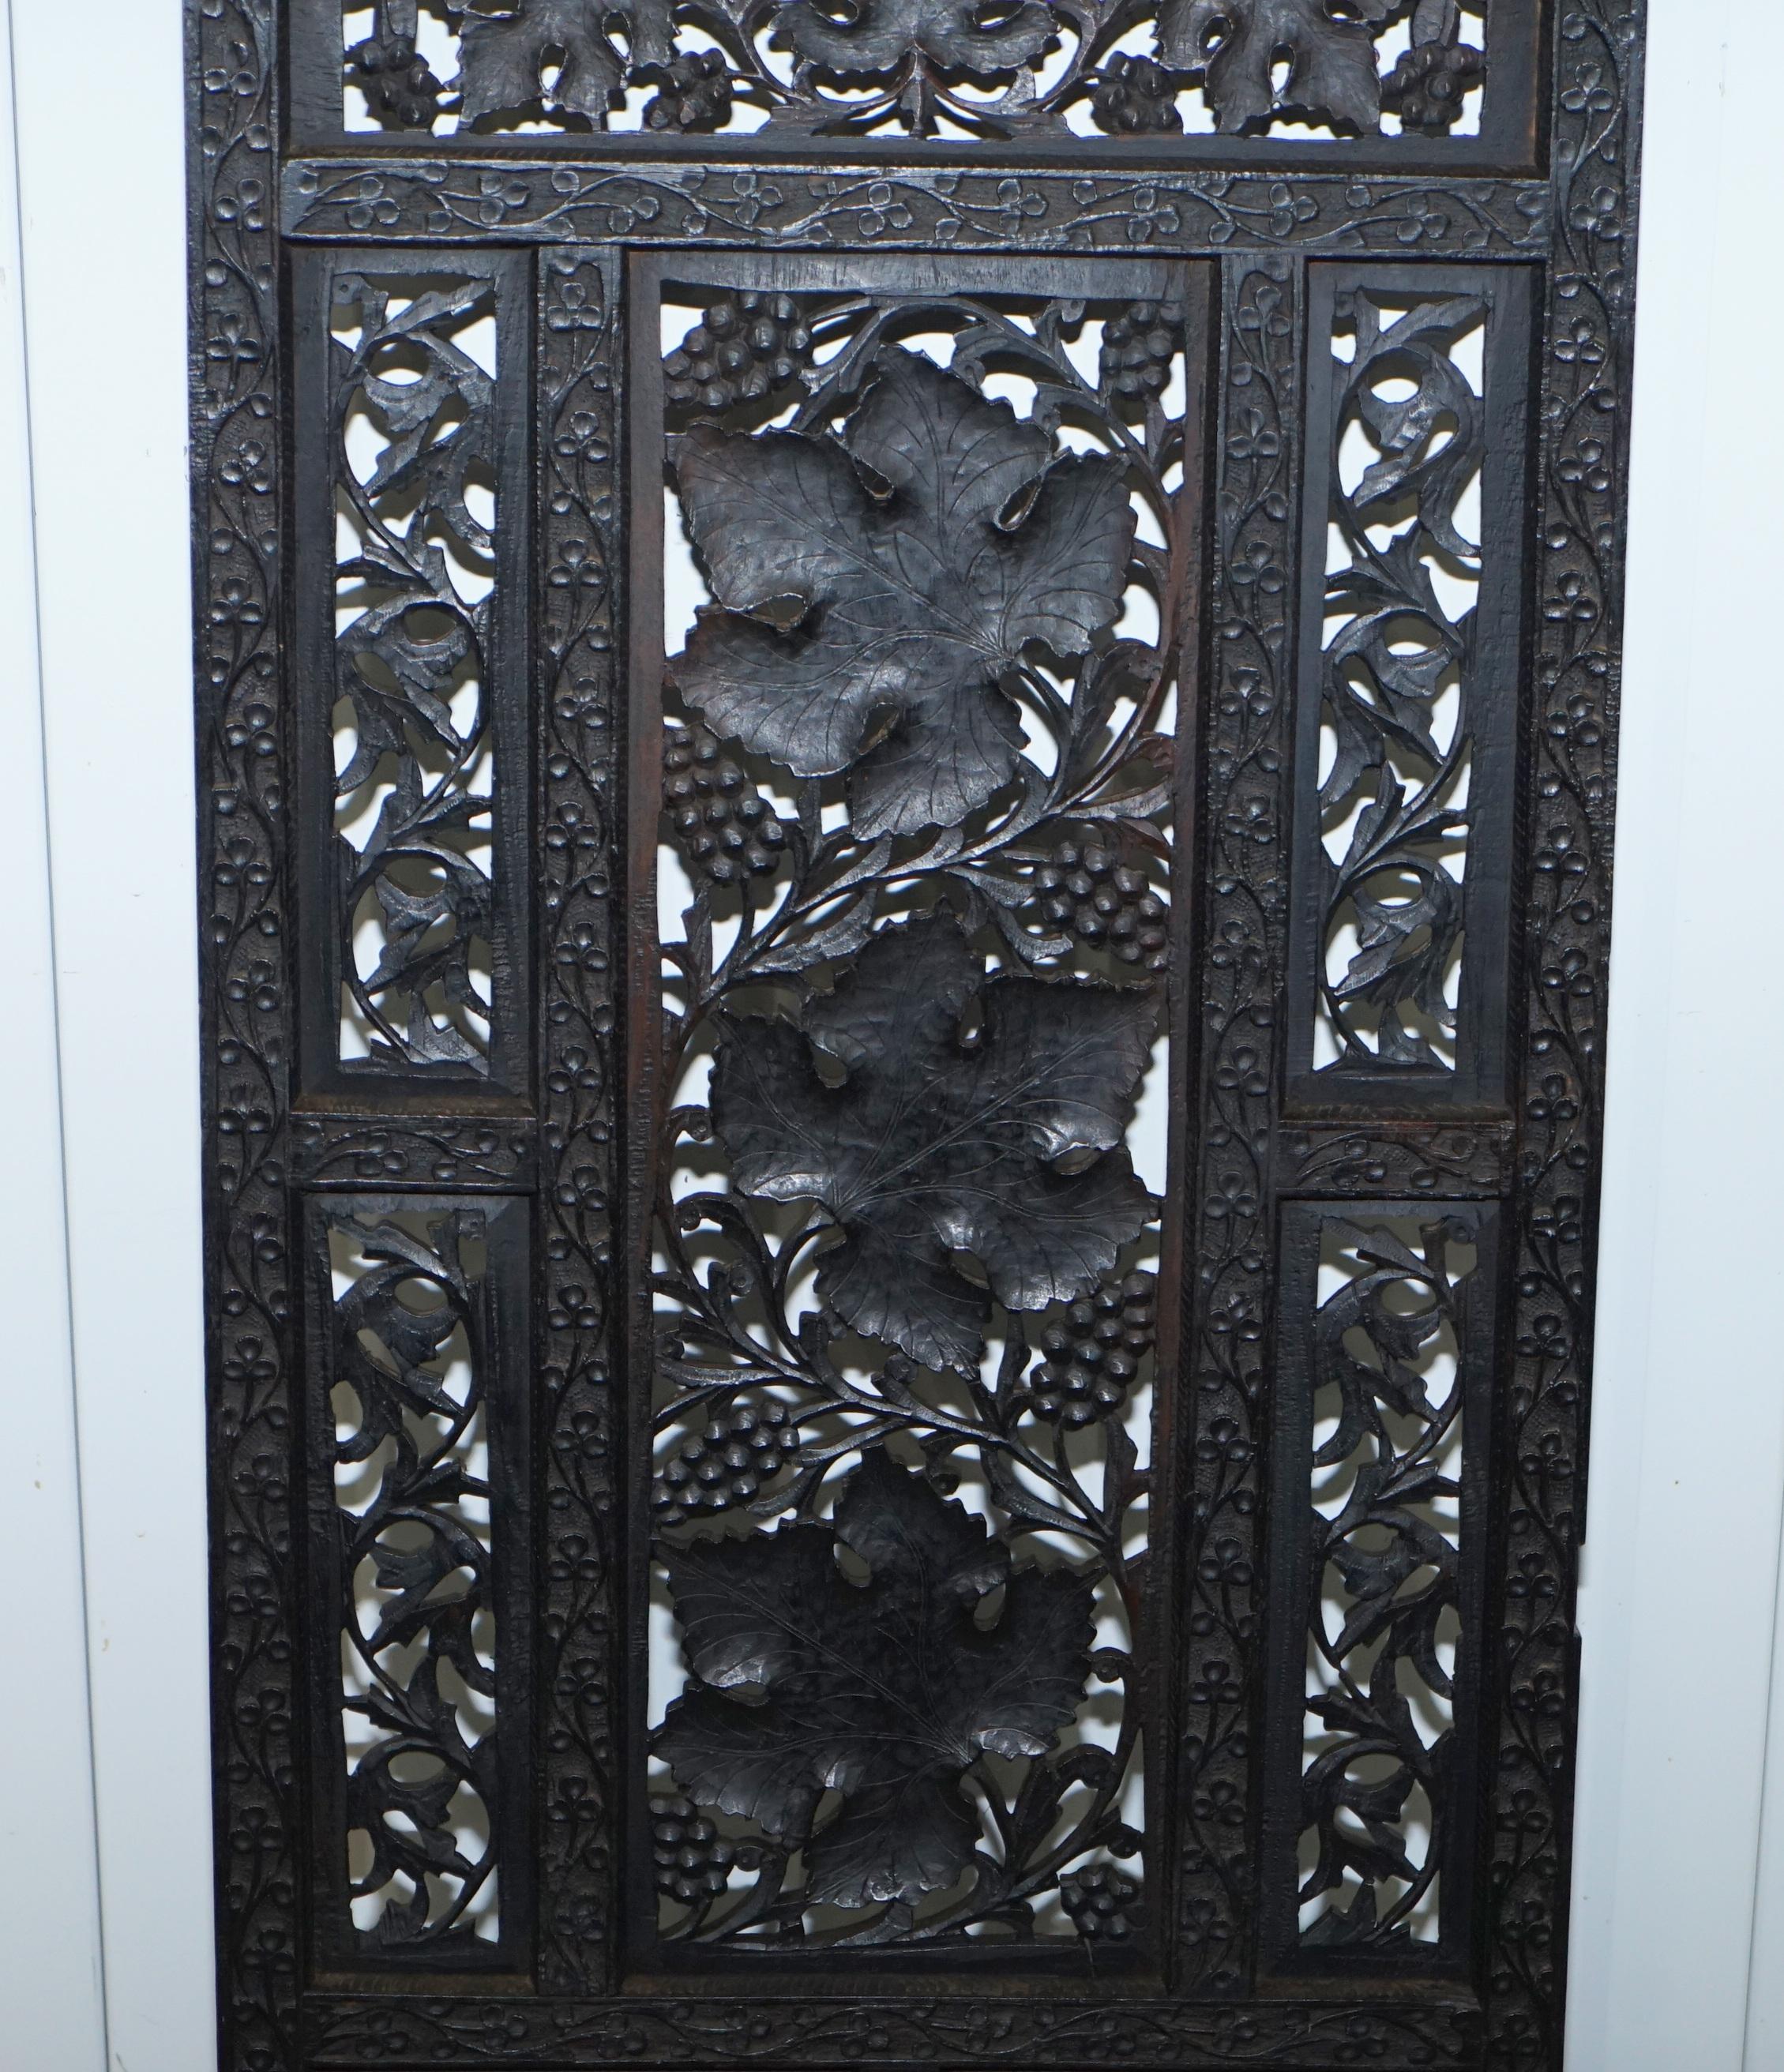 Rare Chinese Fretwork Carved Wall Panels Depicting Leaves Solid Teak Art Wood 11